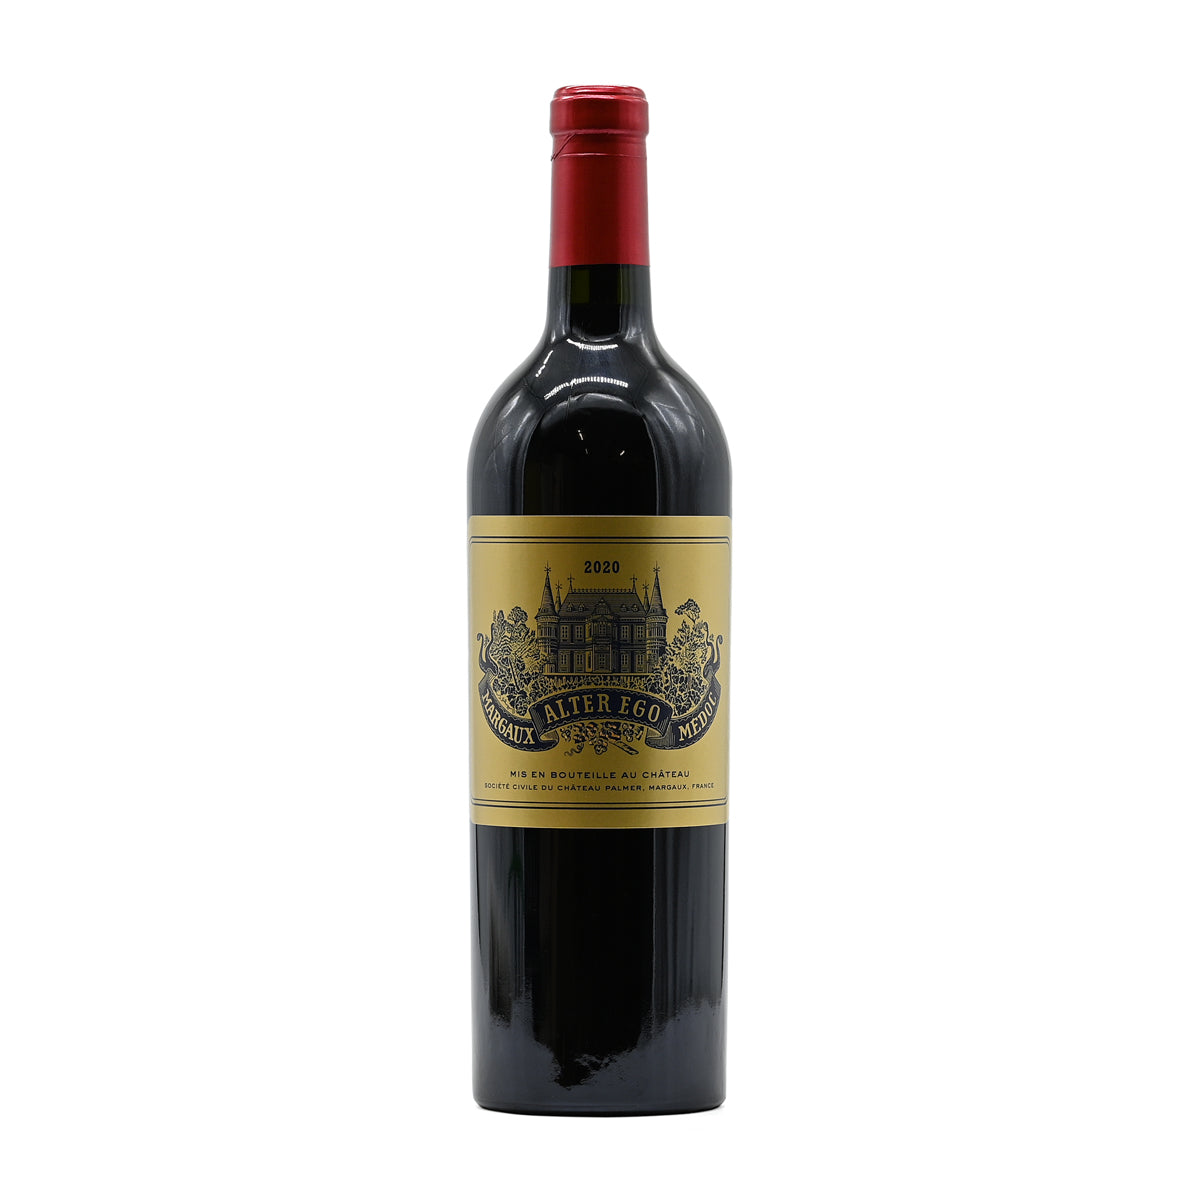 Alter Ego de Palmer 2020, 750ml French red wine, made from a blend of Cabernet Sauvignon, Merlot and Petit Verdot; from Margaux, Bordeaux, France – GDV Fine Wines, Hong Kong